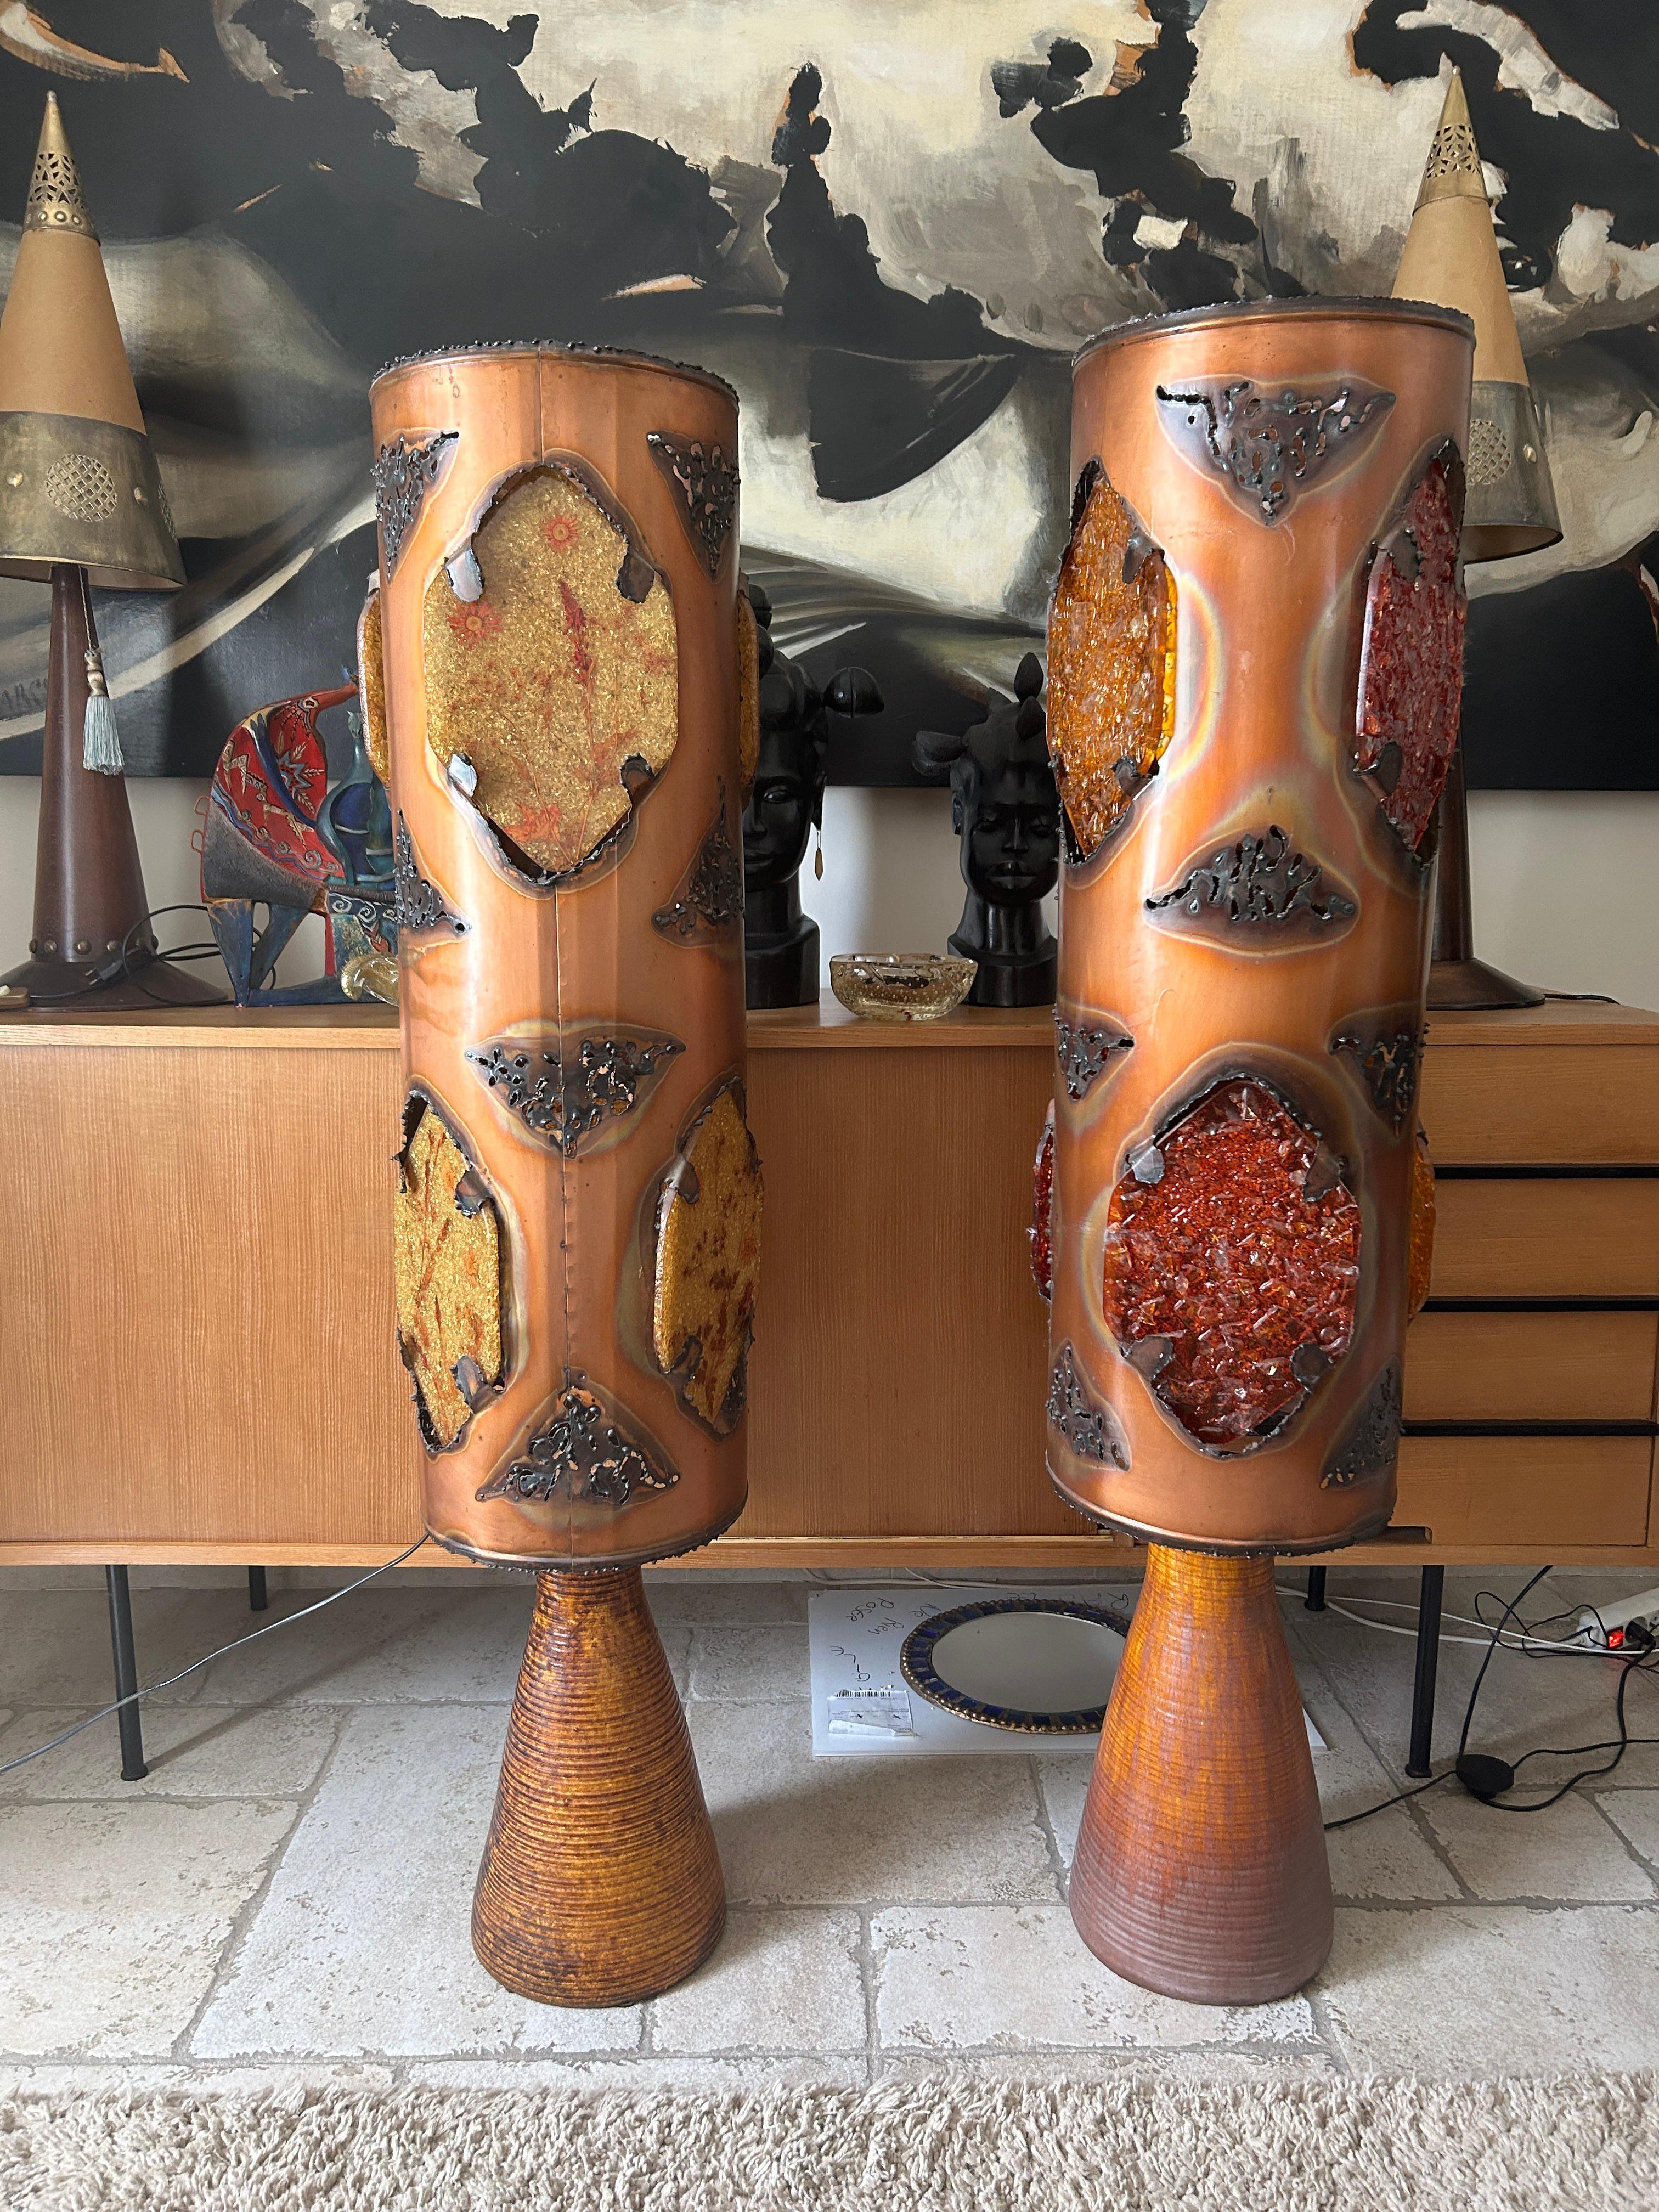 Pair of Sculptural accolay lamp in ceramic, resin and copper. Double lighting in the lampshade. Good condition. Height: 144 cm. Diameter: 31 cm. No crack.

The Accolay pottery was created after the Second World War by 4 former students of Alexandre